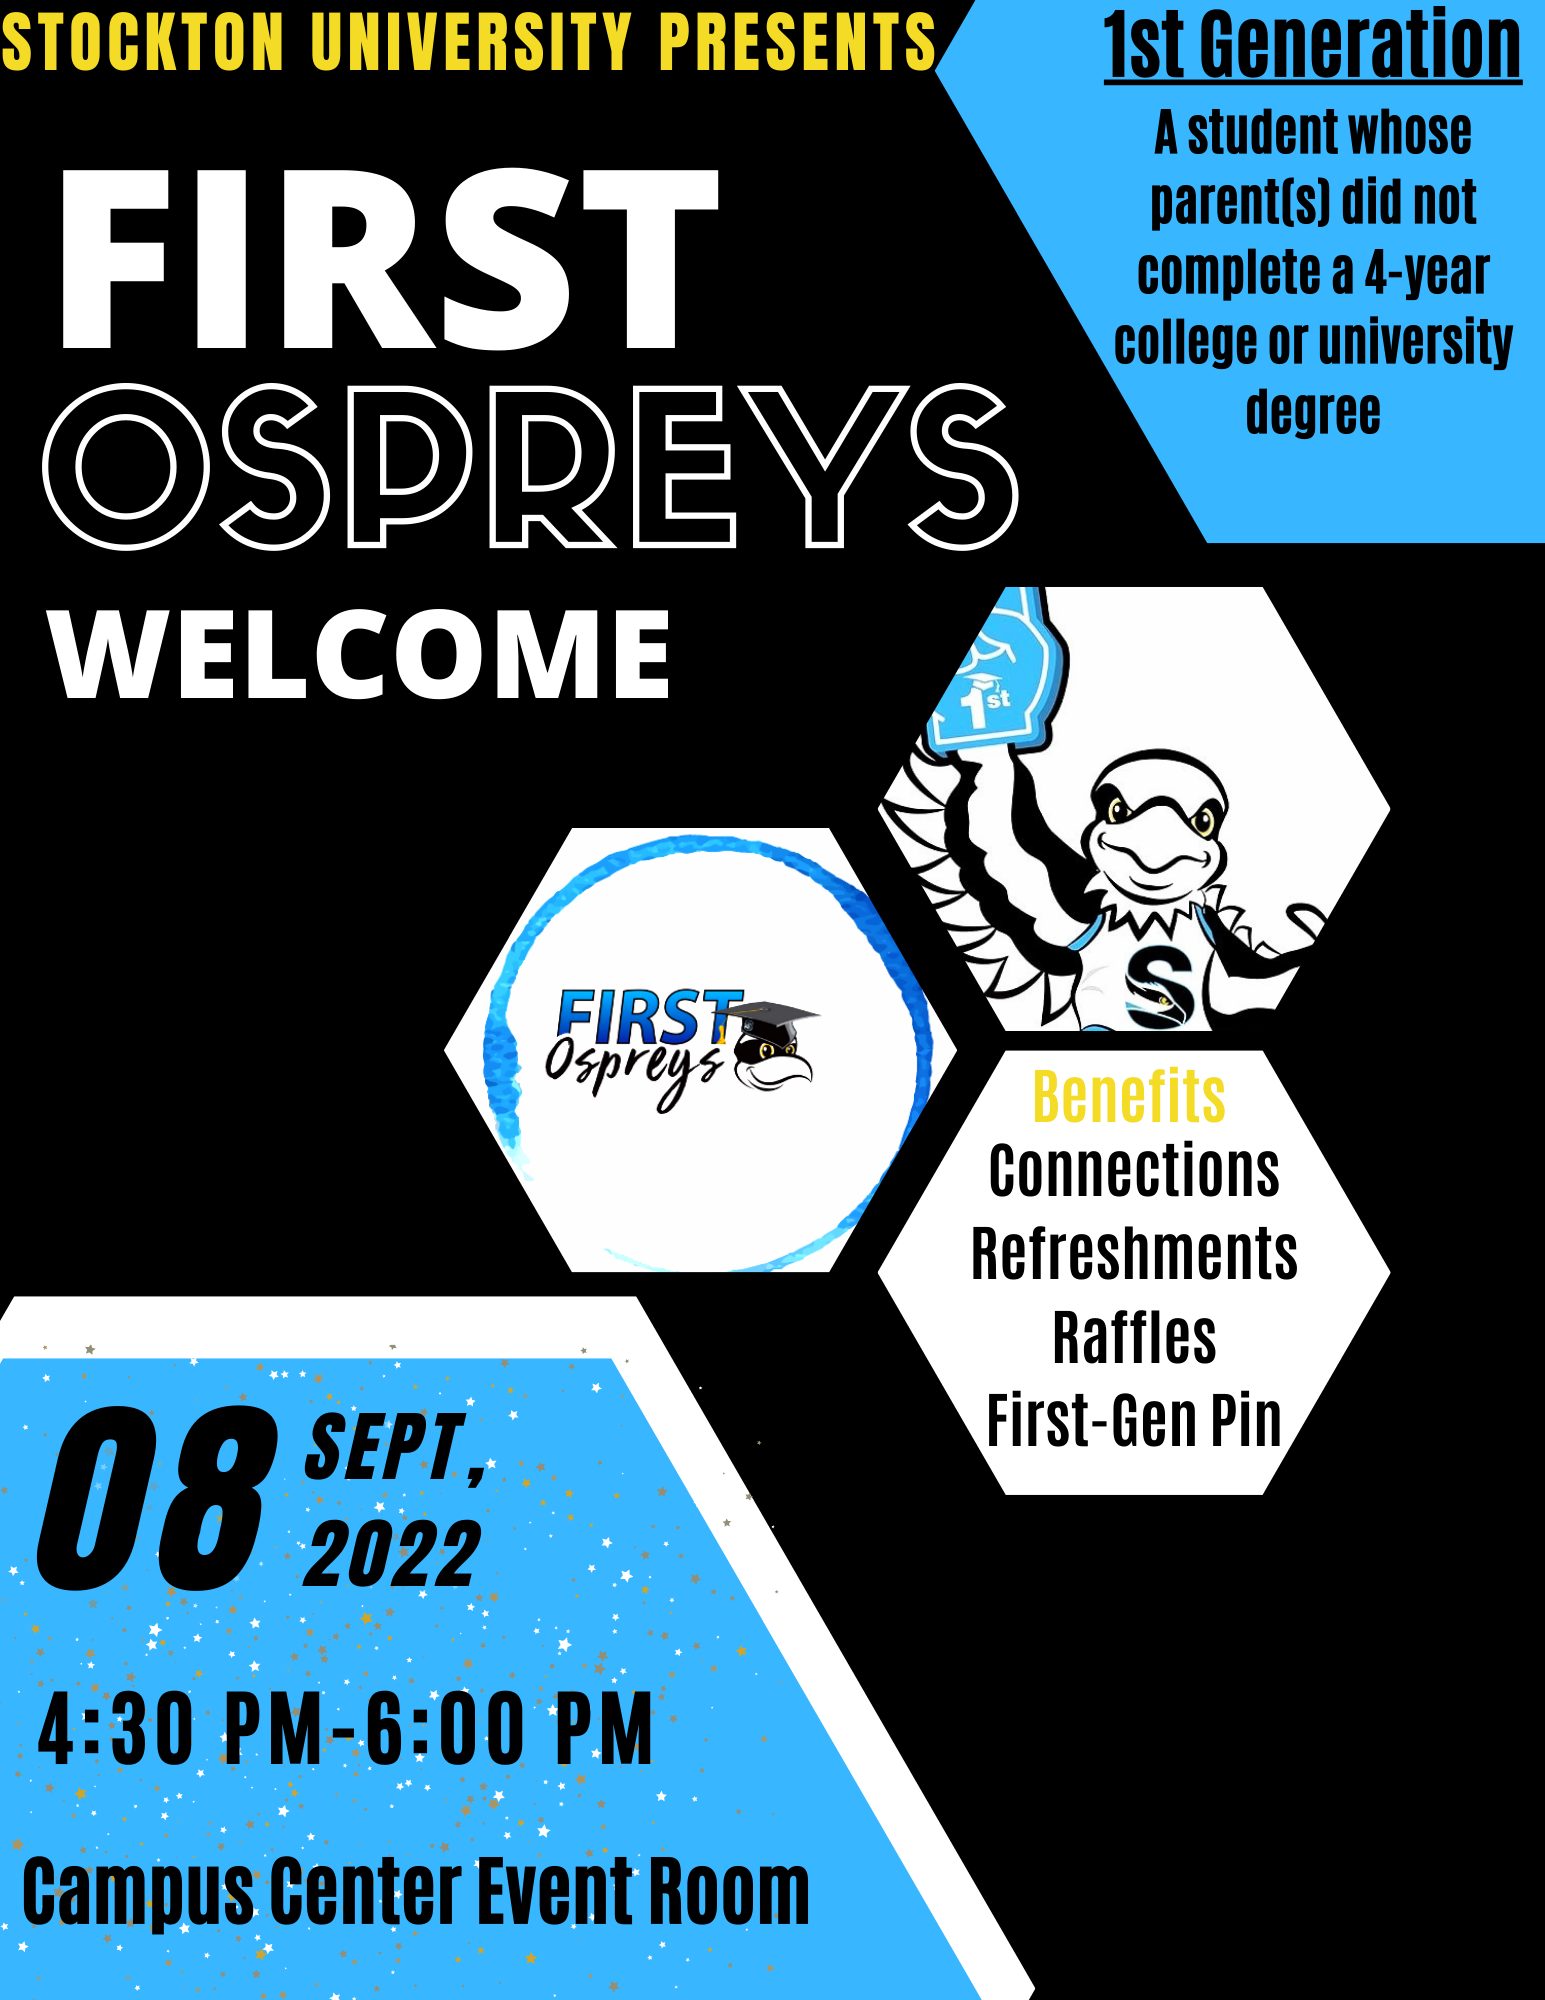 First Ospreys Welcome, 09.08, 4:30-6:00, Campus Center Event Room A